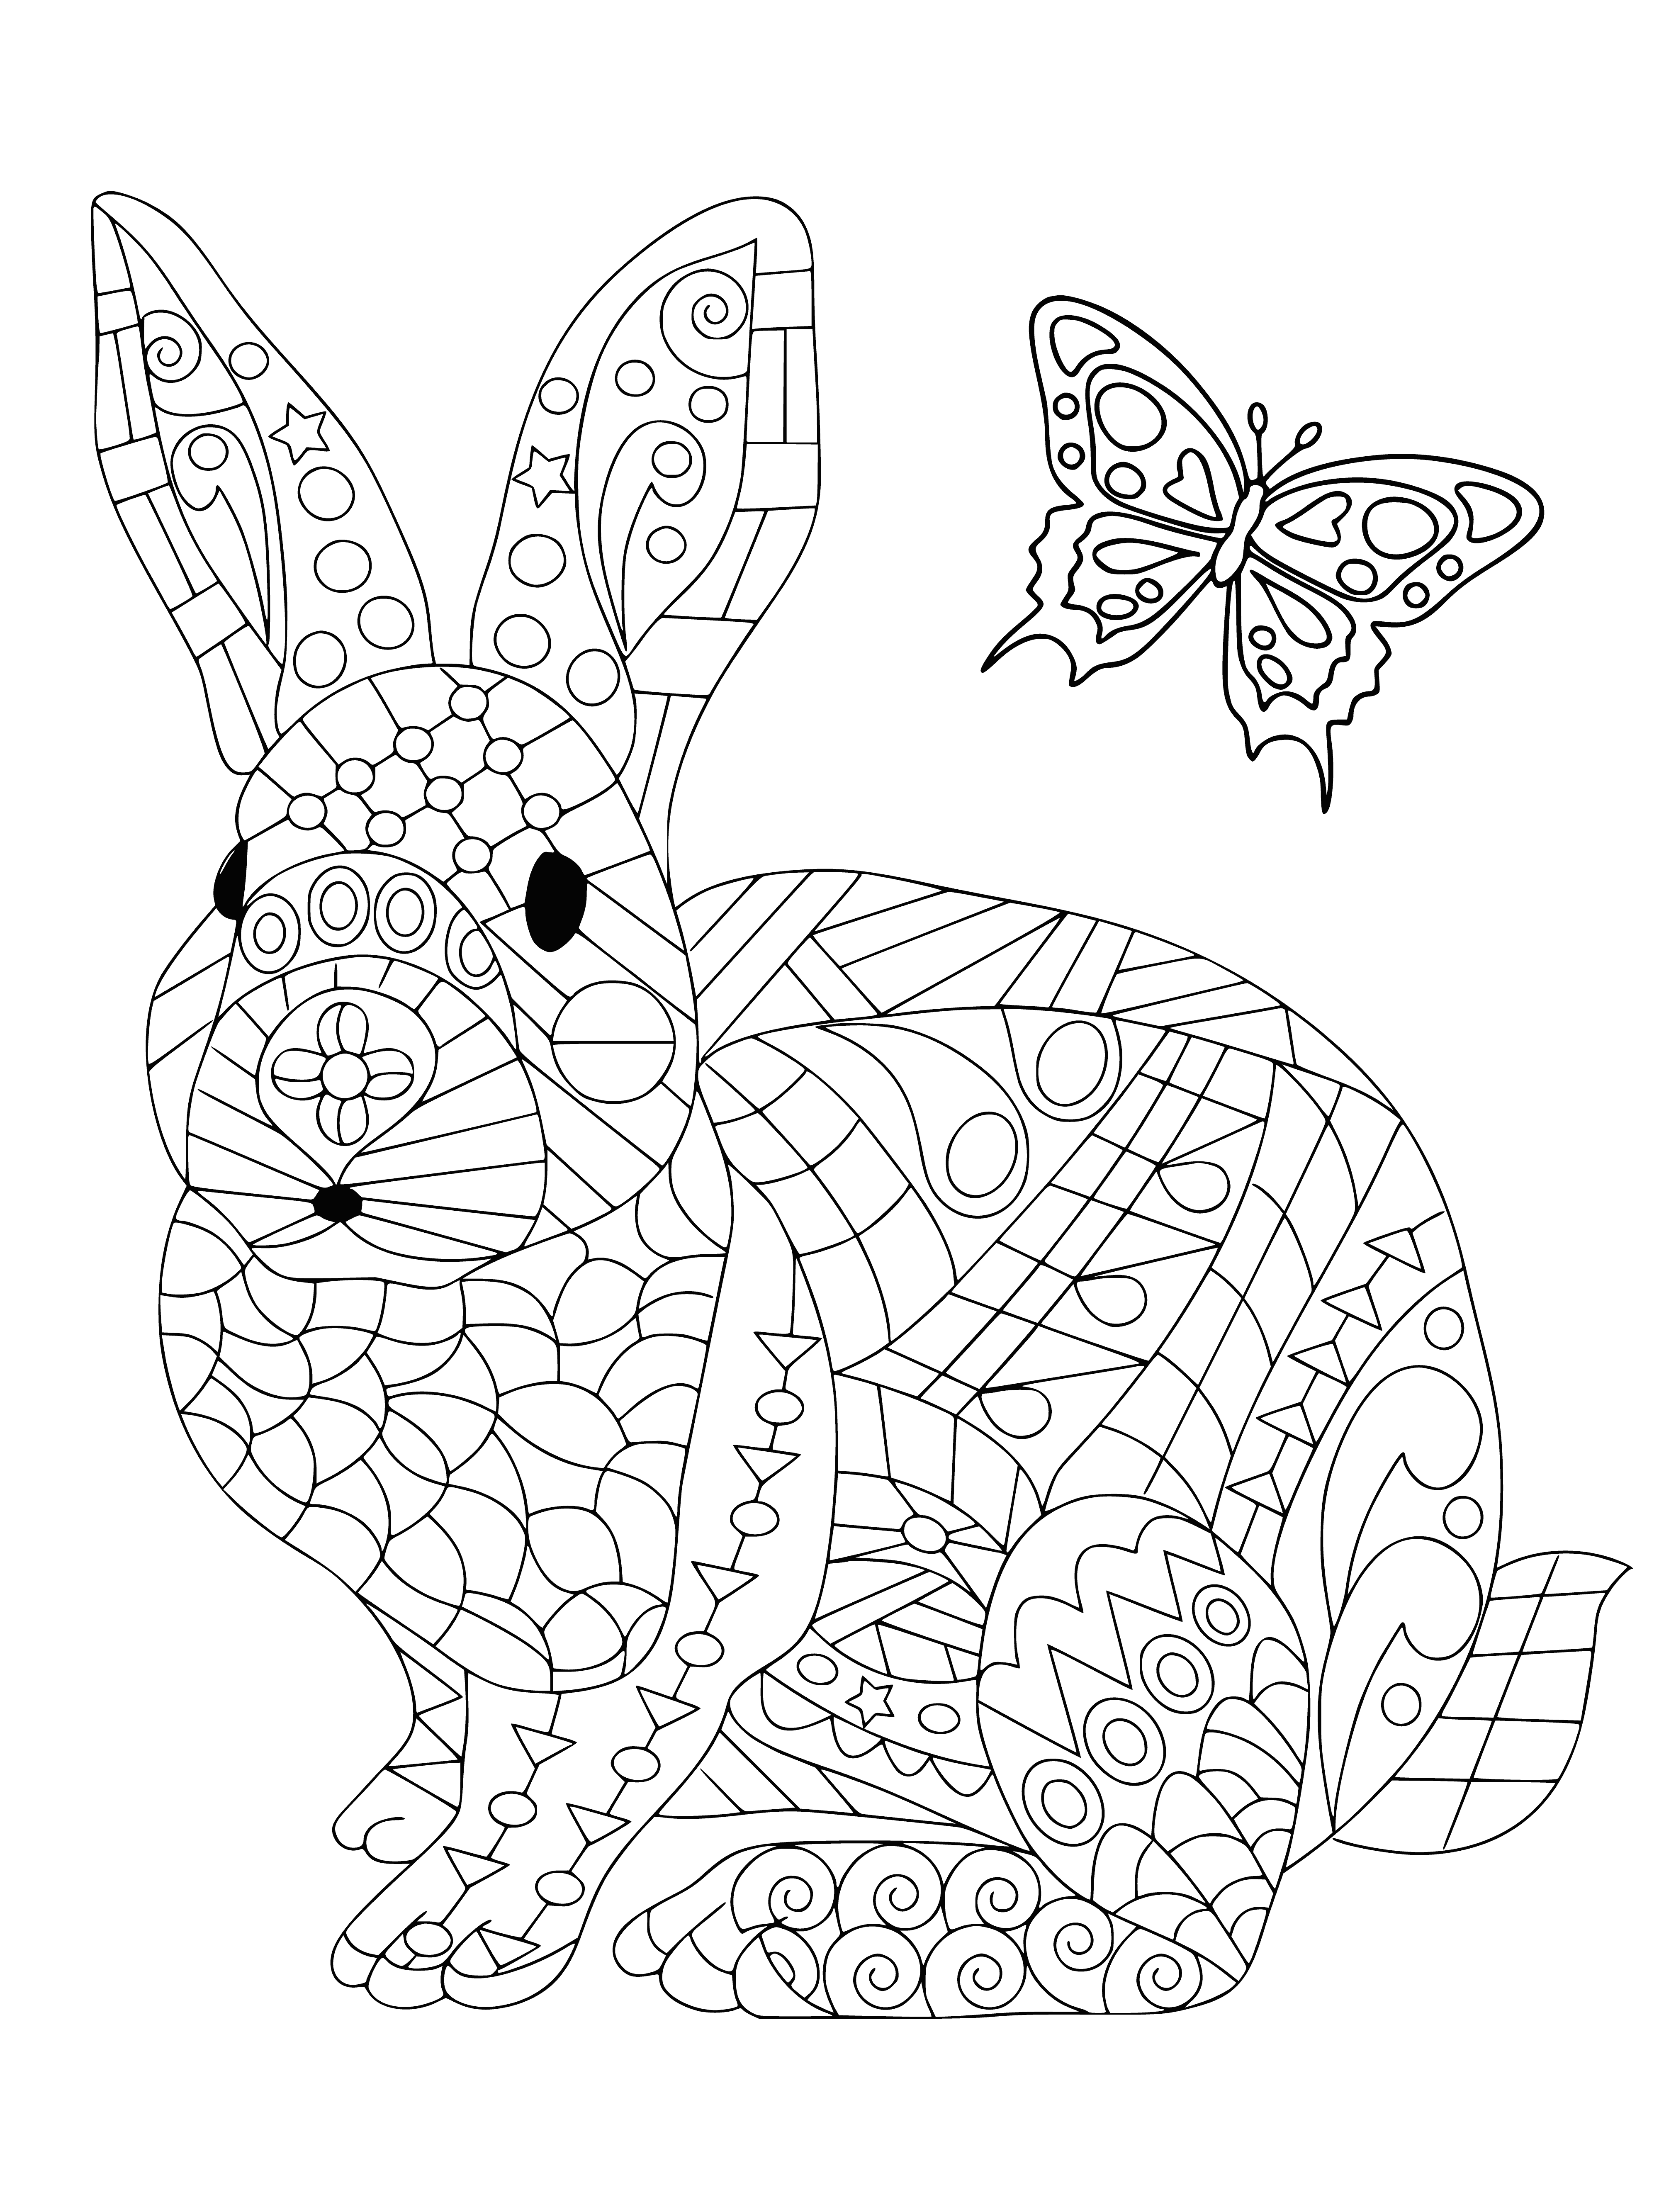 coloring page: Cartoon rabbit surrounded by butterfly and flowers looks happy & relaxed.